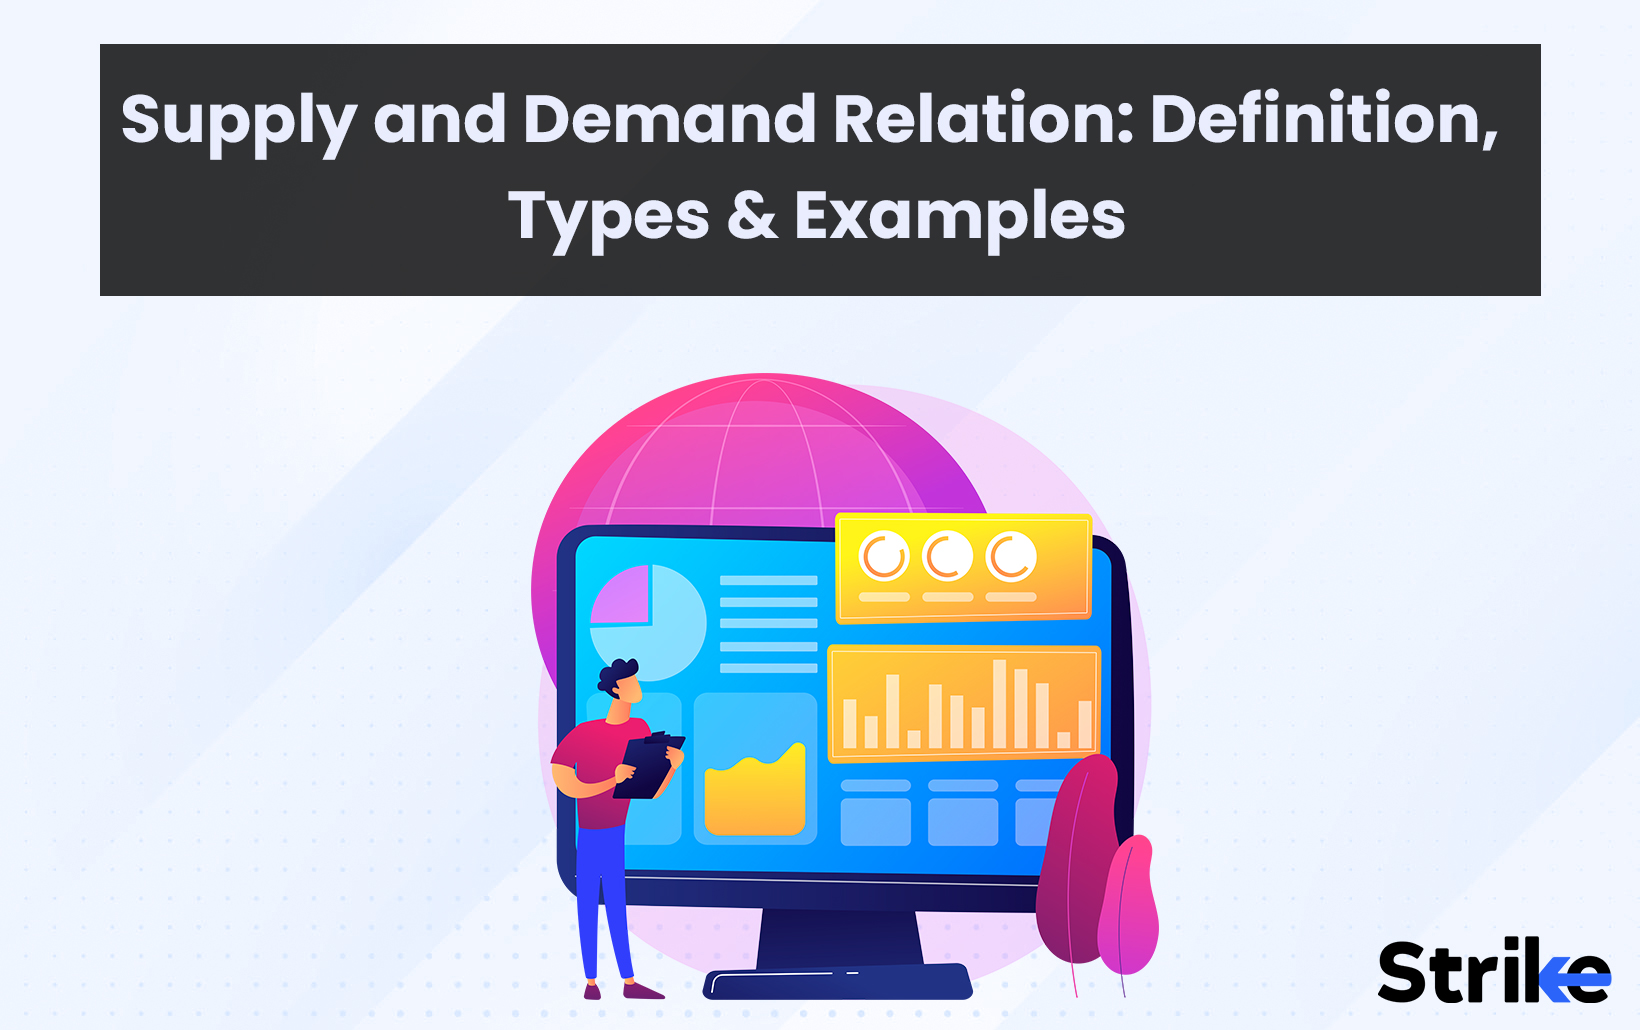 Supply and Demand Relation: Definition, Types, and Examples